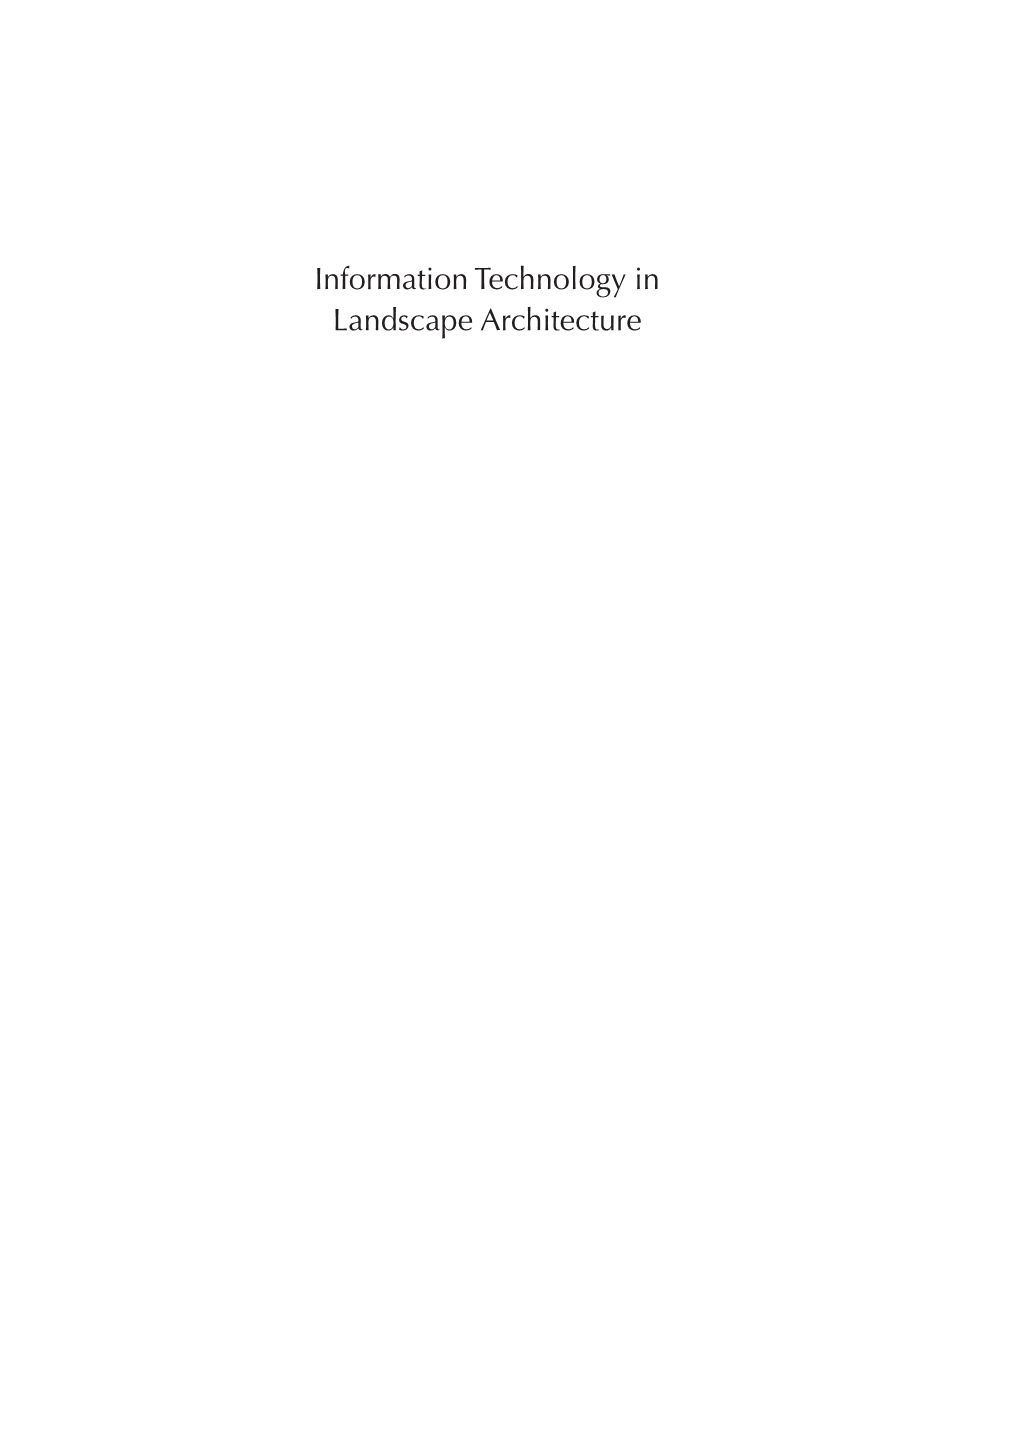 Information Technology in Landscape Architecture